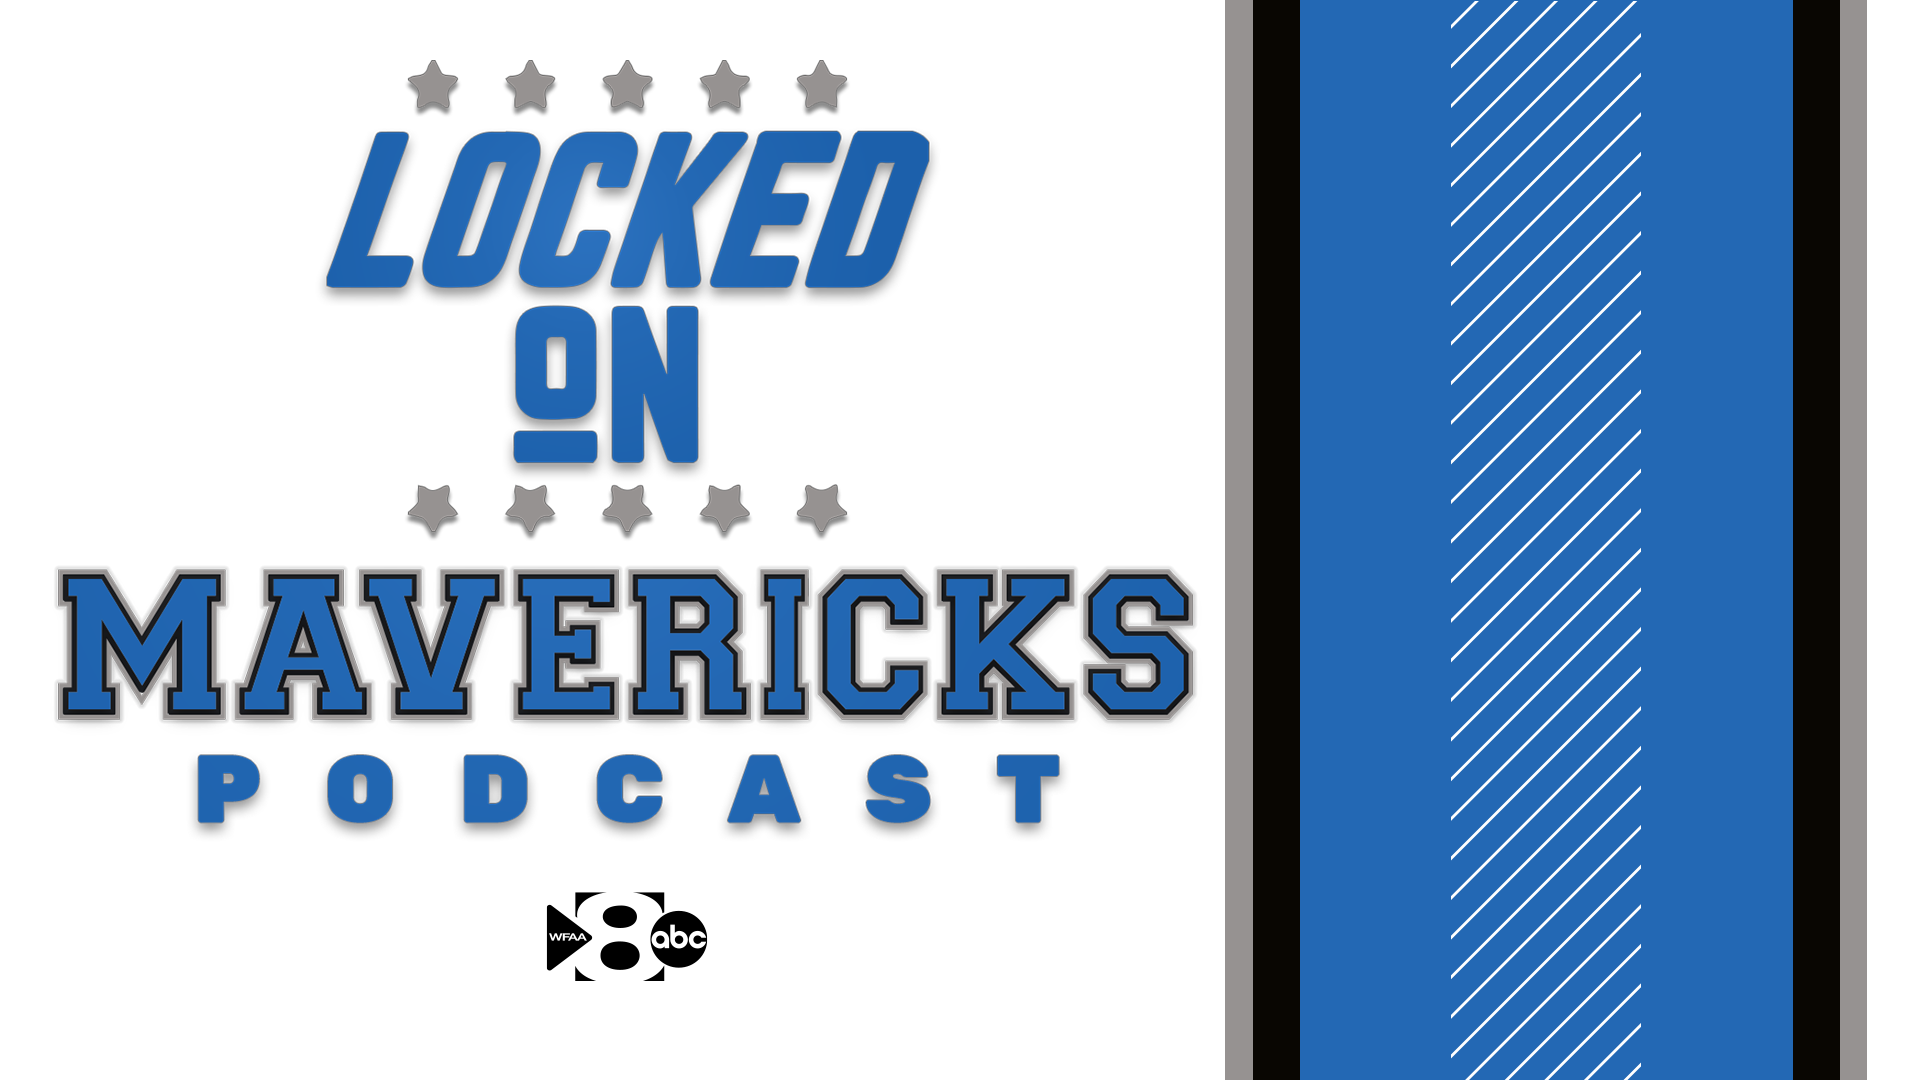 @NickVanExit and @IsaacLHarris break down all the NBA Draft and free agency rumors swirling around the Dallas Mavericks.